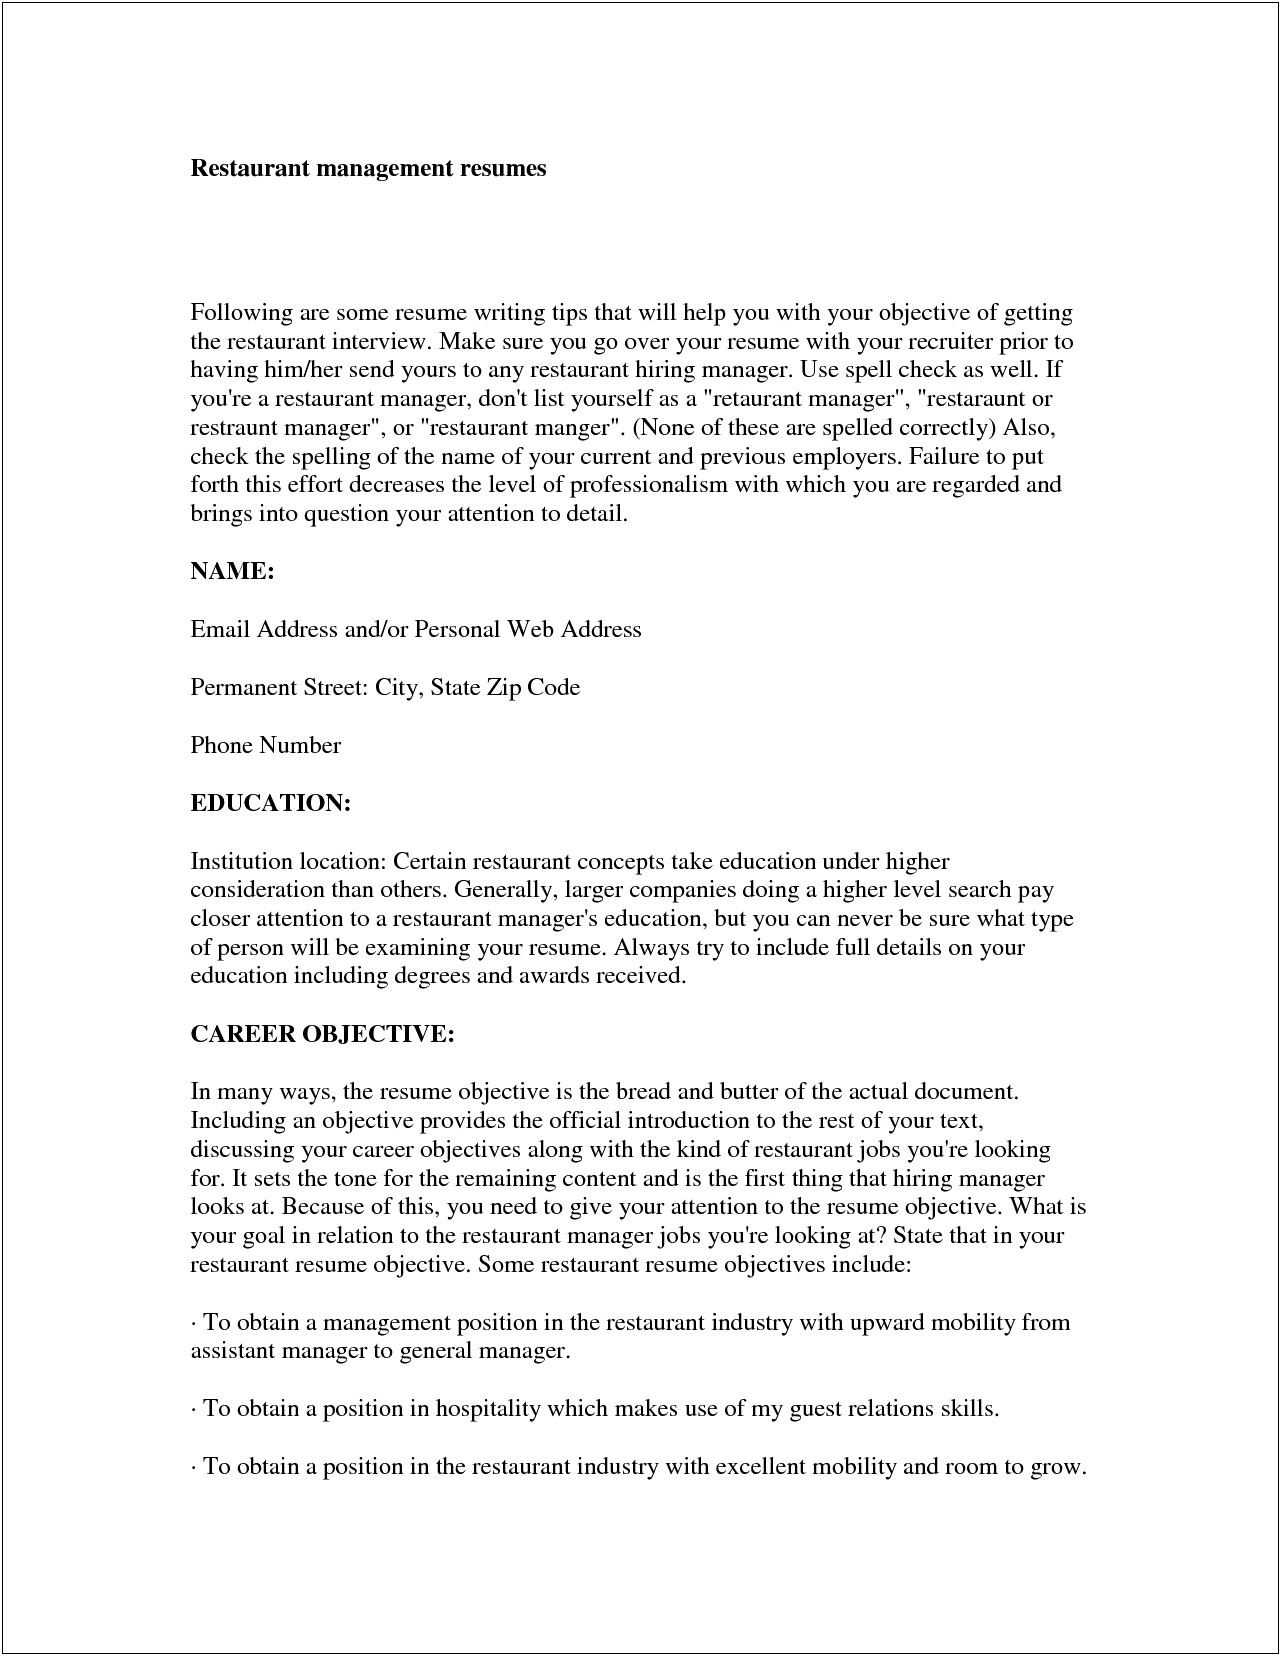 Resume Objective Examples Business Development